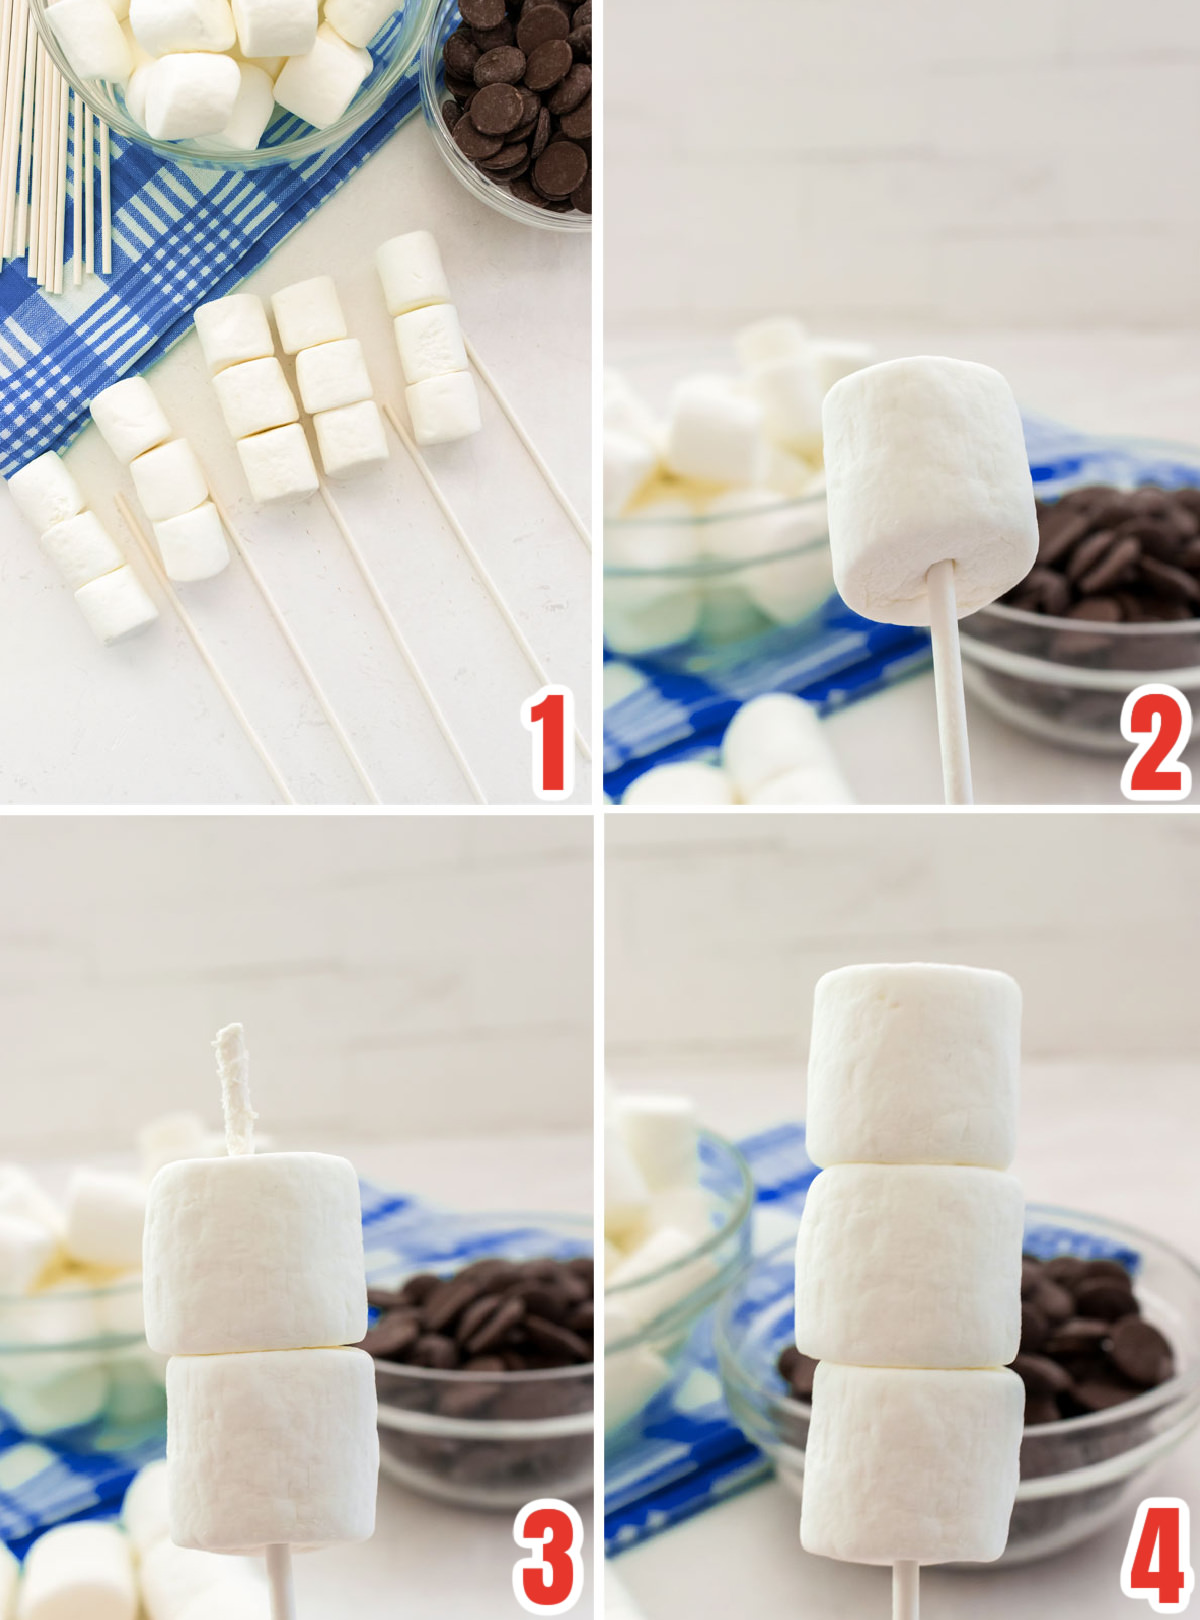 Collage image showing the steps you need to take to create the marshmallow pop by placing the marshmallows on the lollipop stick.